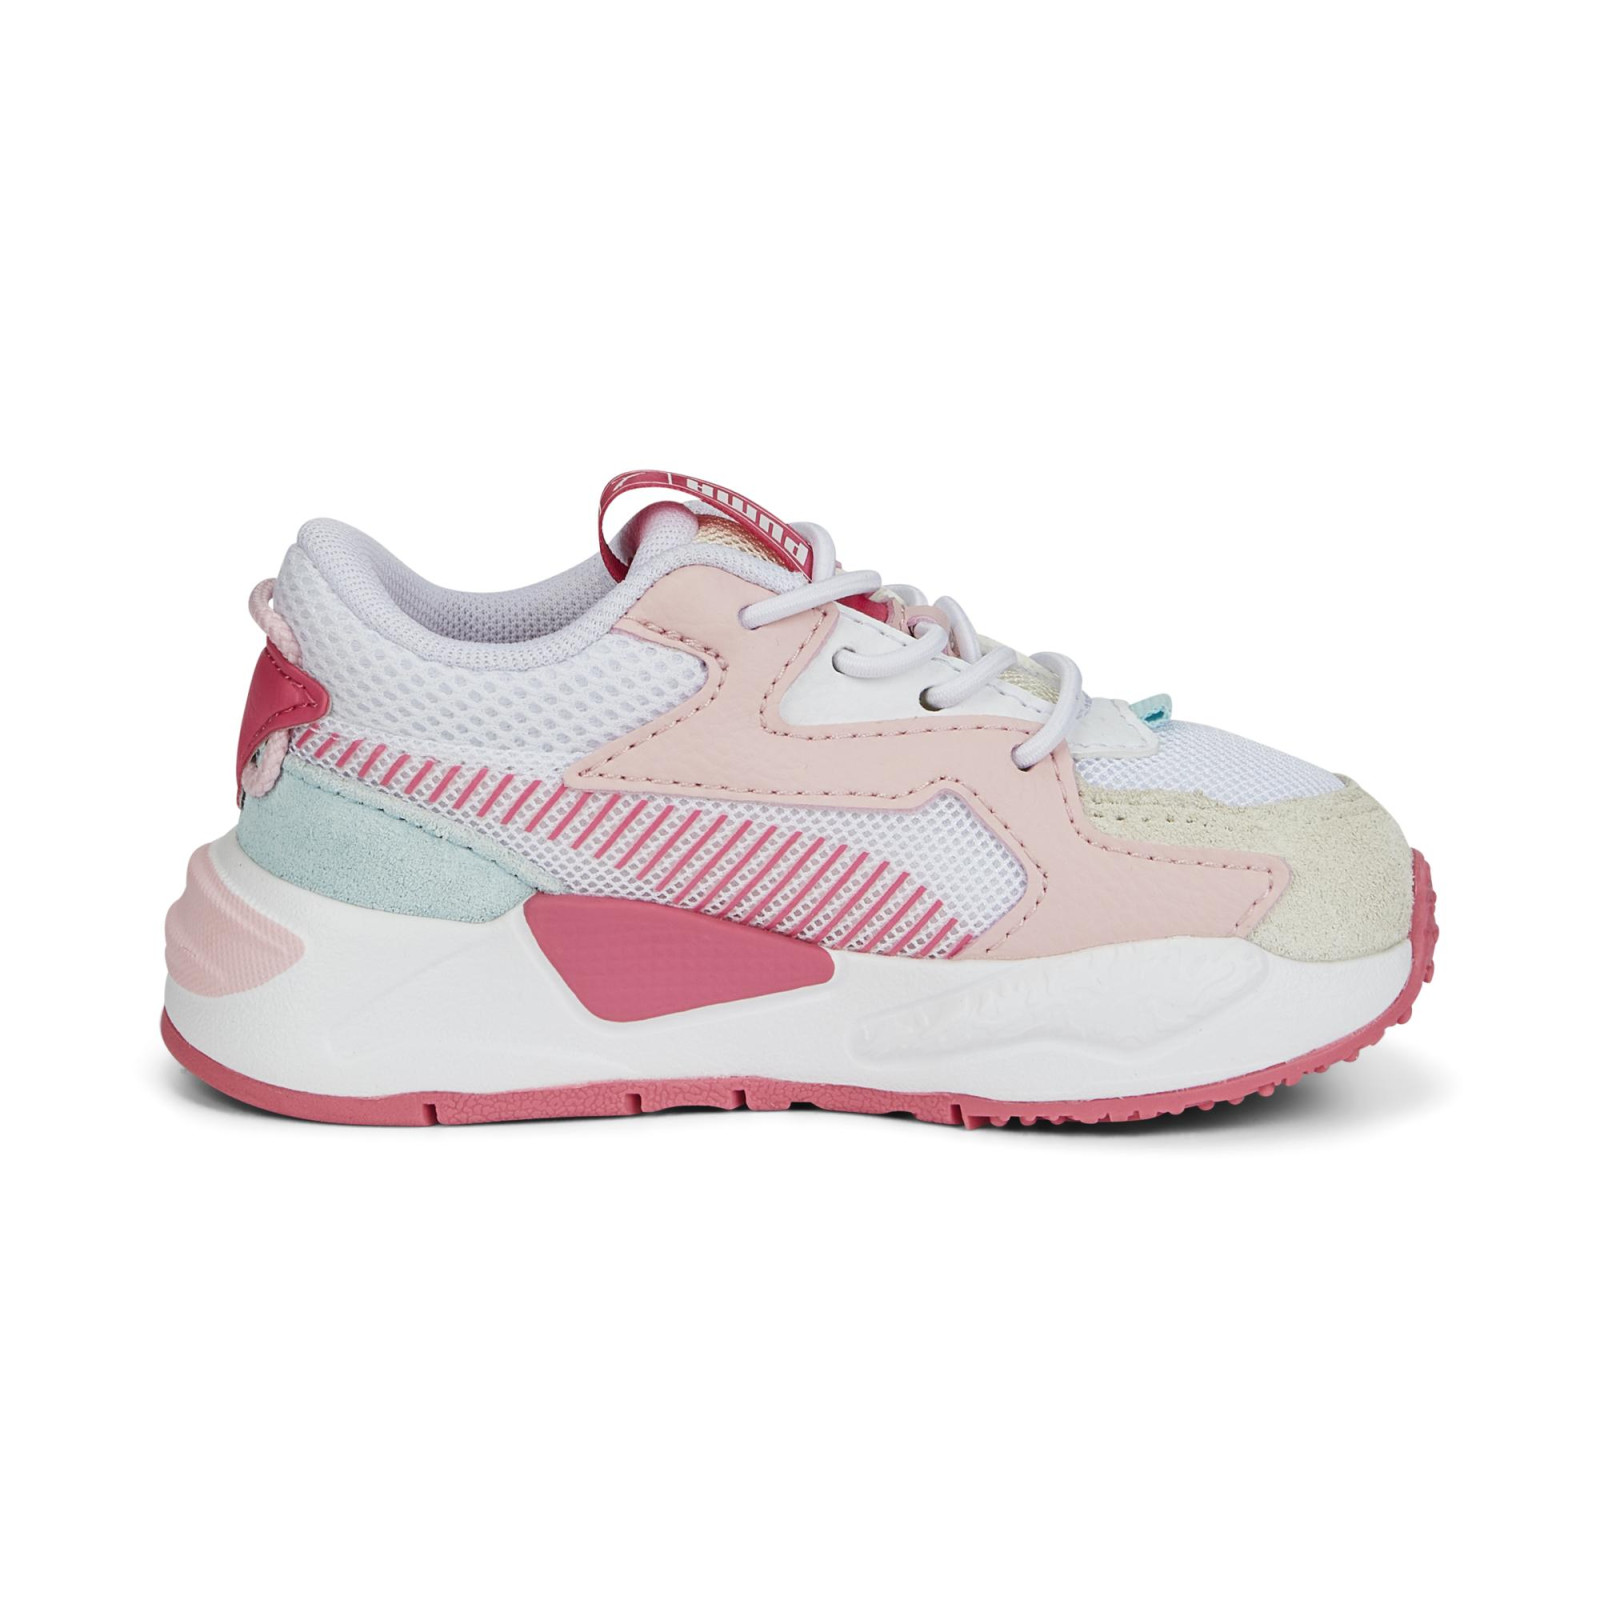 PUMA RS Z TOP AC INF WHITE PINK